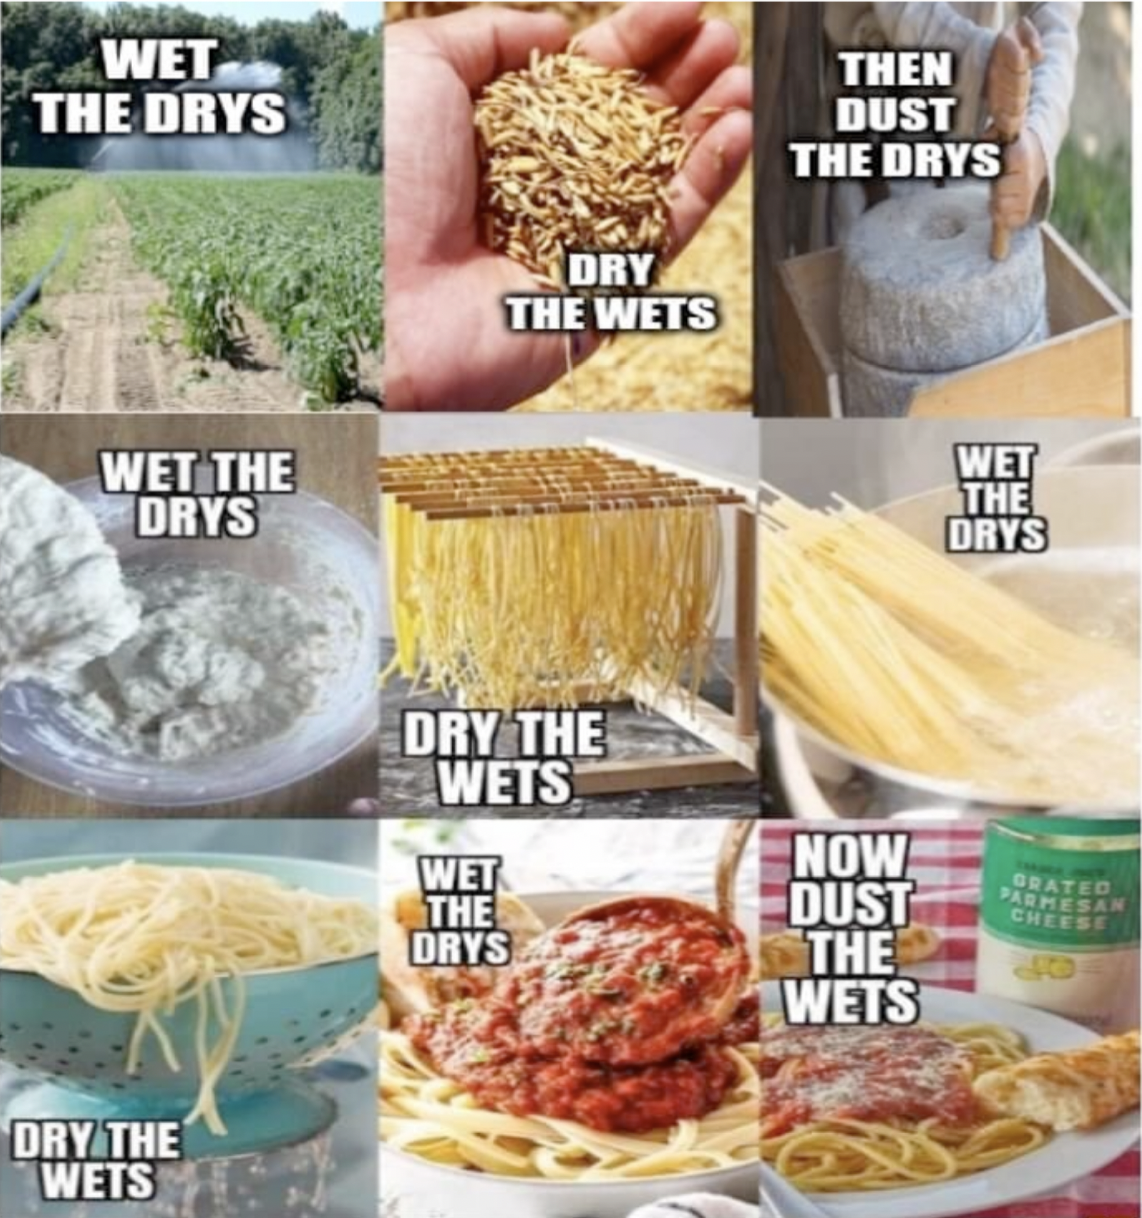 meme showing pasta making in terms of drying and wetting processes